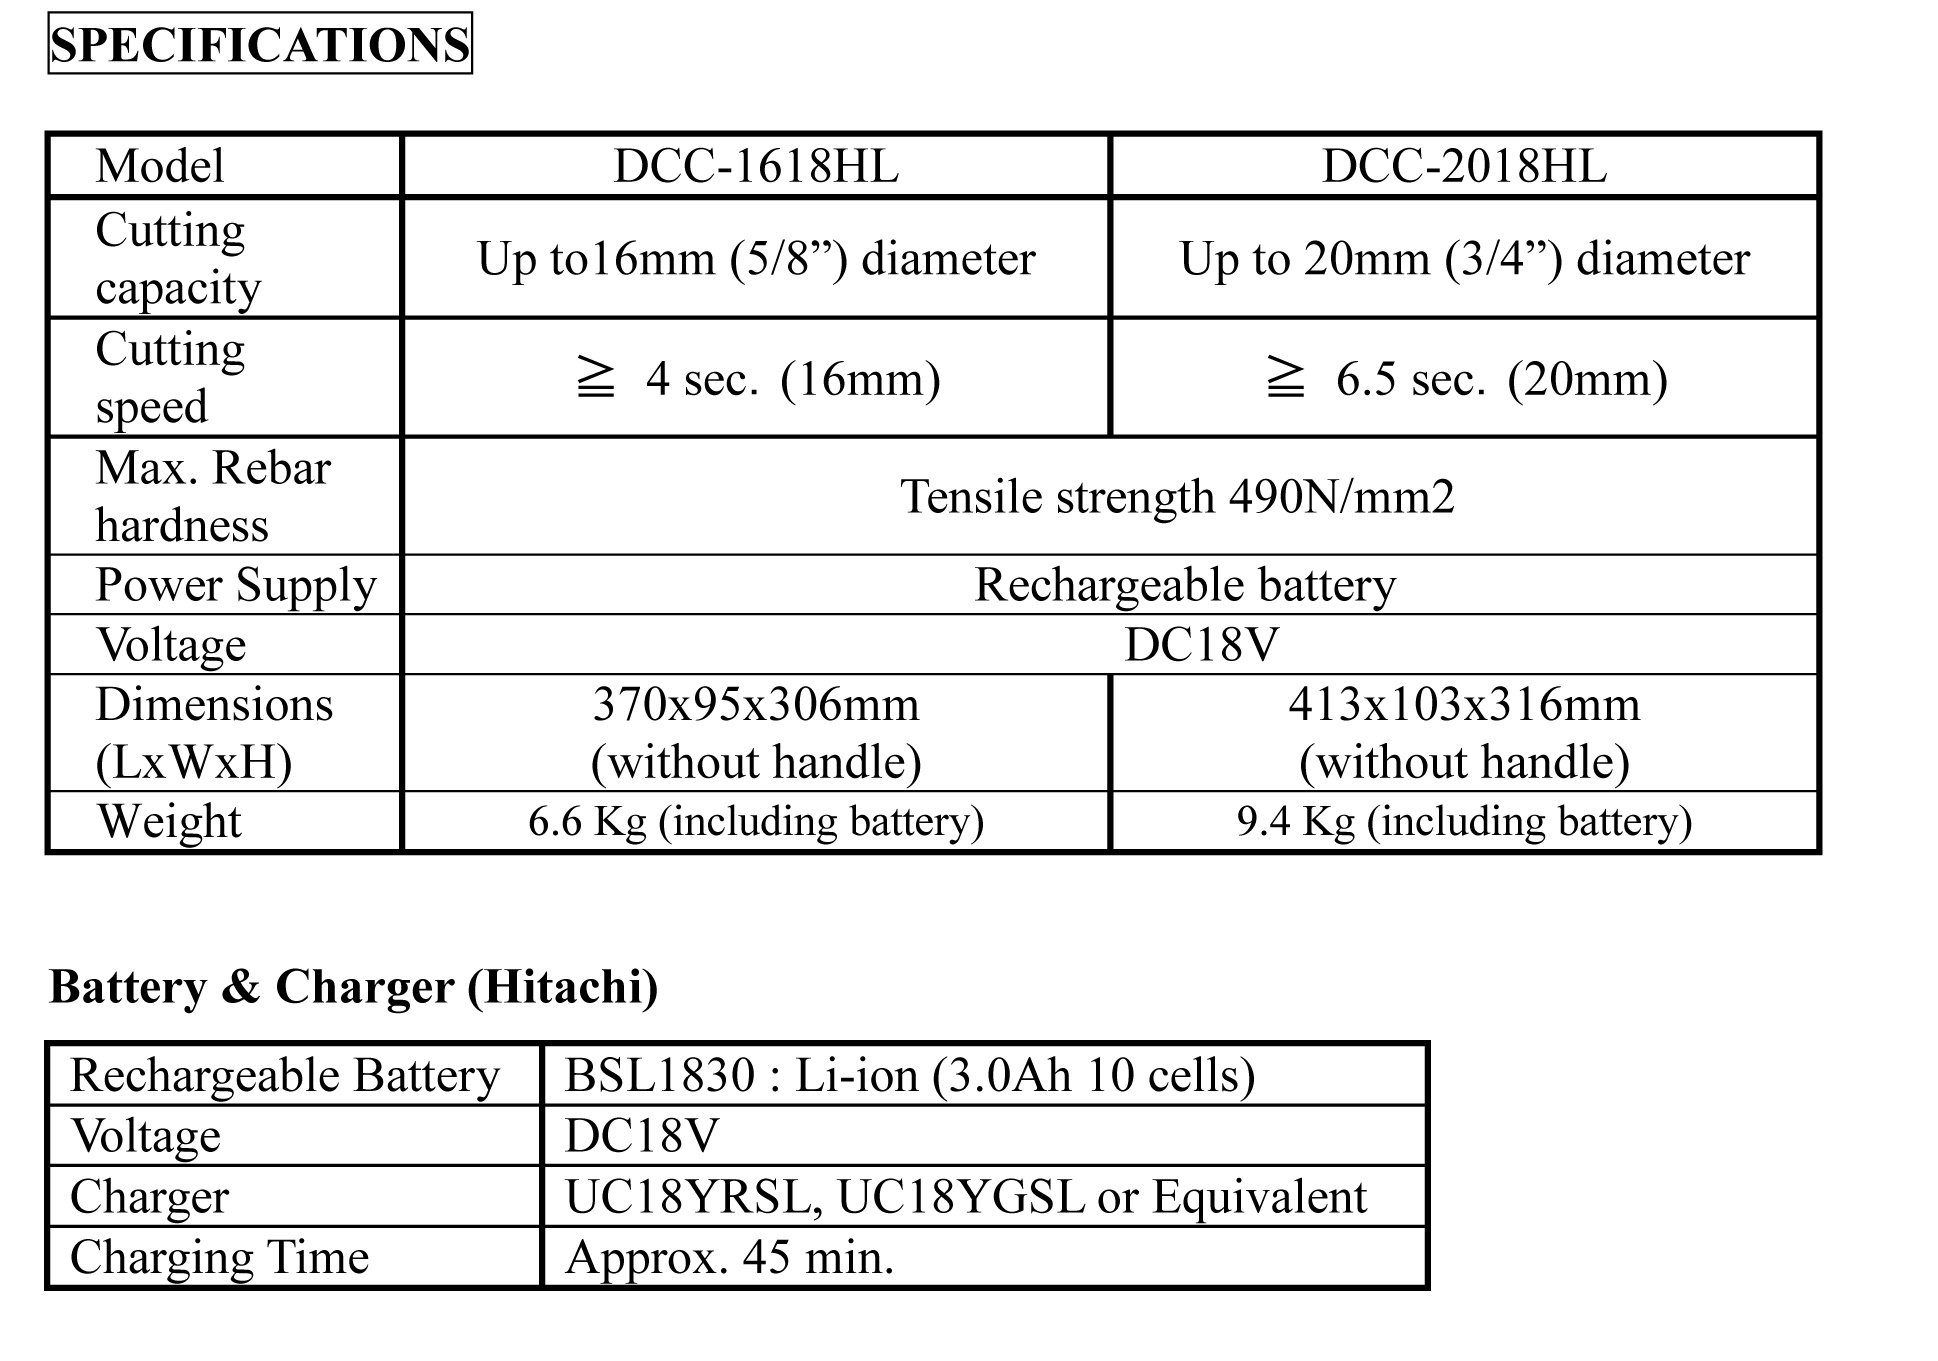 DIAMOND DCC-1618HL and DCC-2018HL cutter specifications